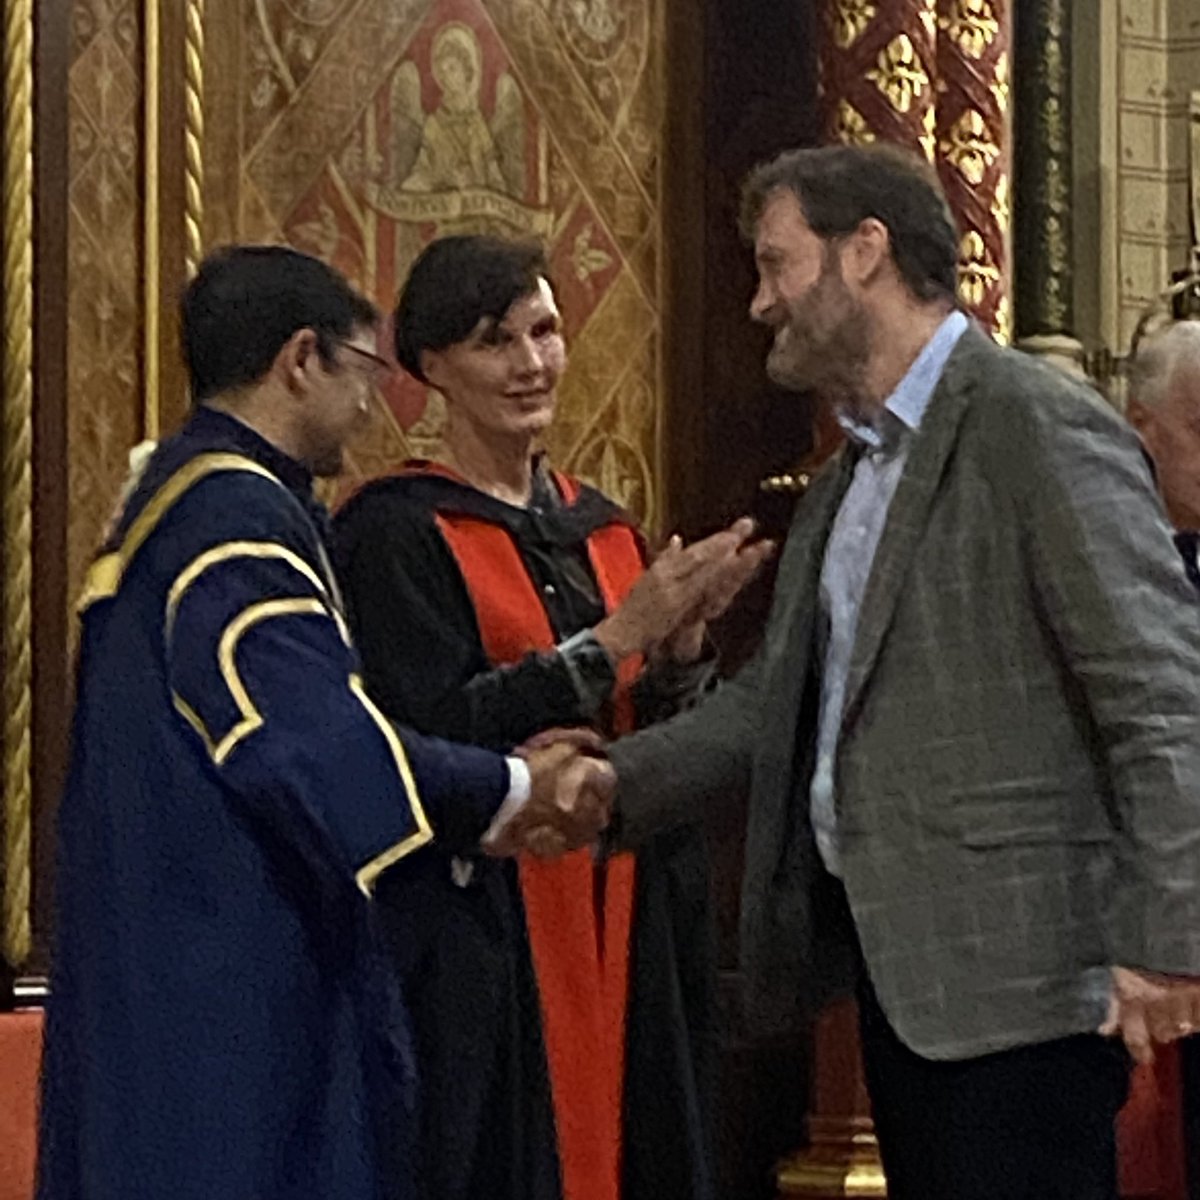 I was very proud to have been part of the New Professors ceremony in the Strand Chapel last night. Thanks to the Principal @KingsCollegeLon for hosting this event, and congratulations to all the other New Professors!